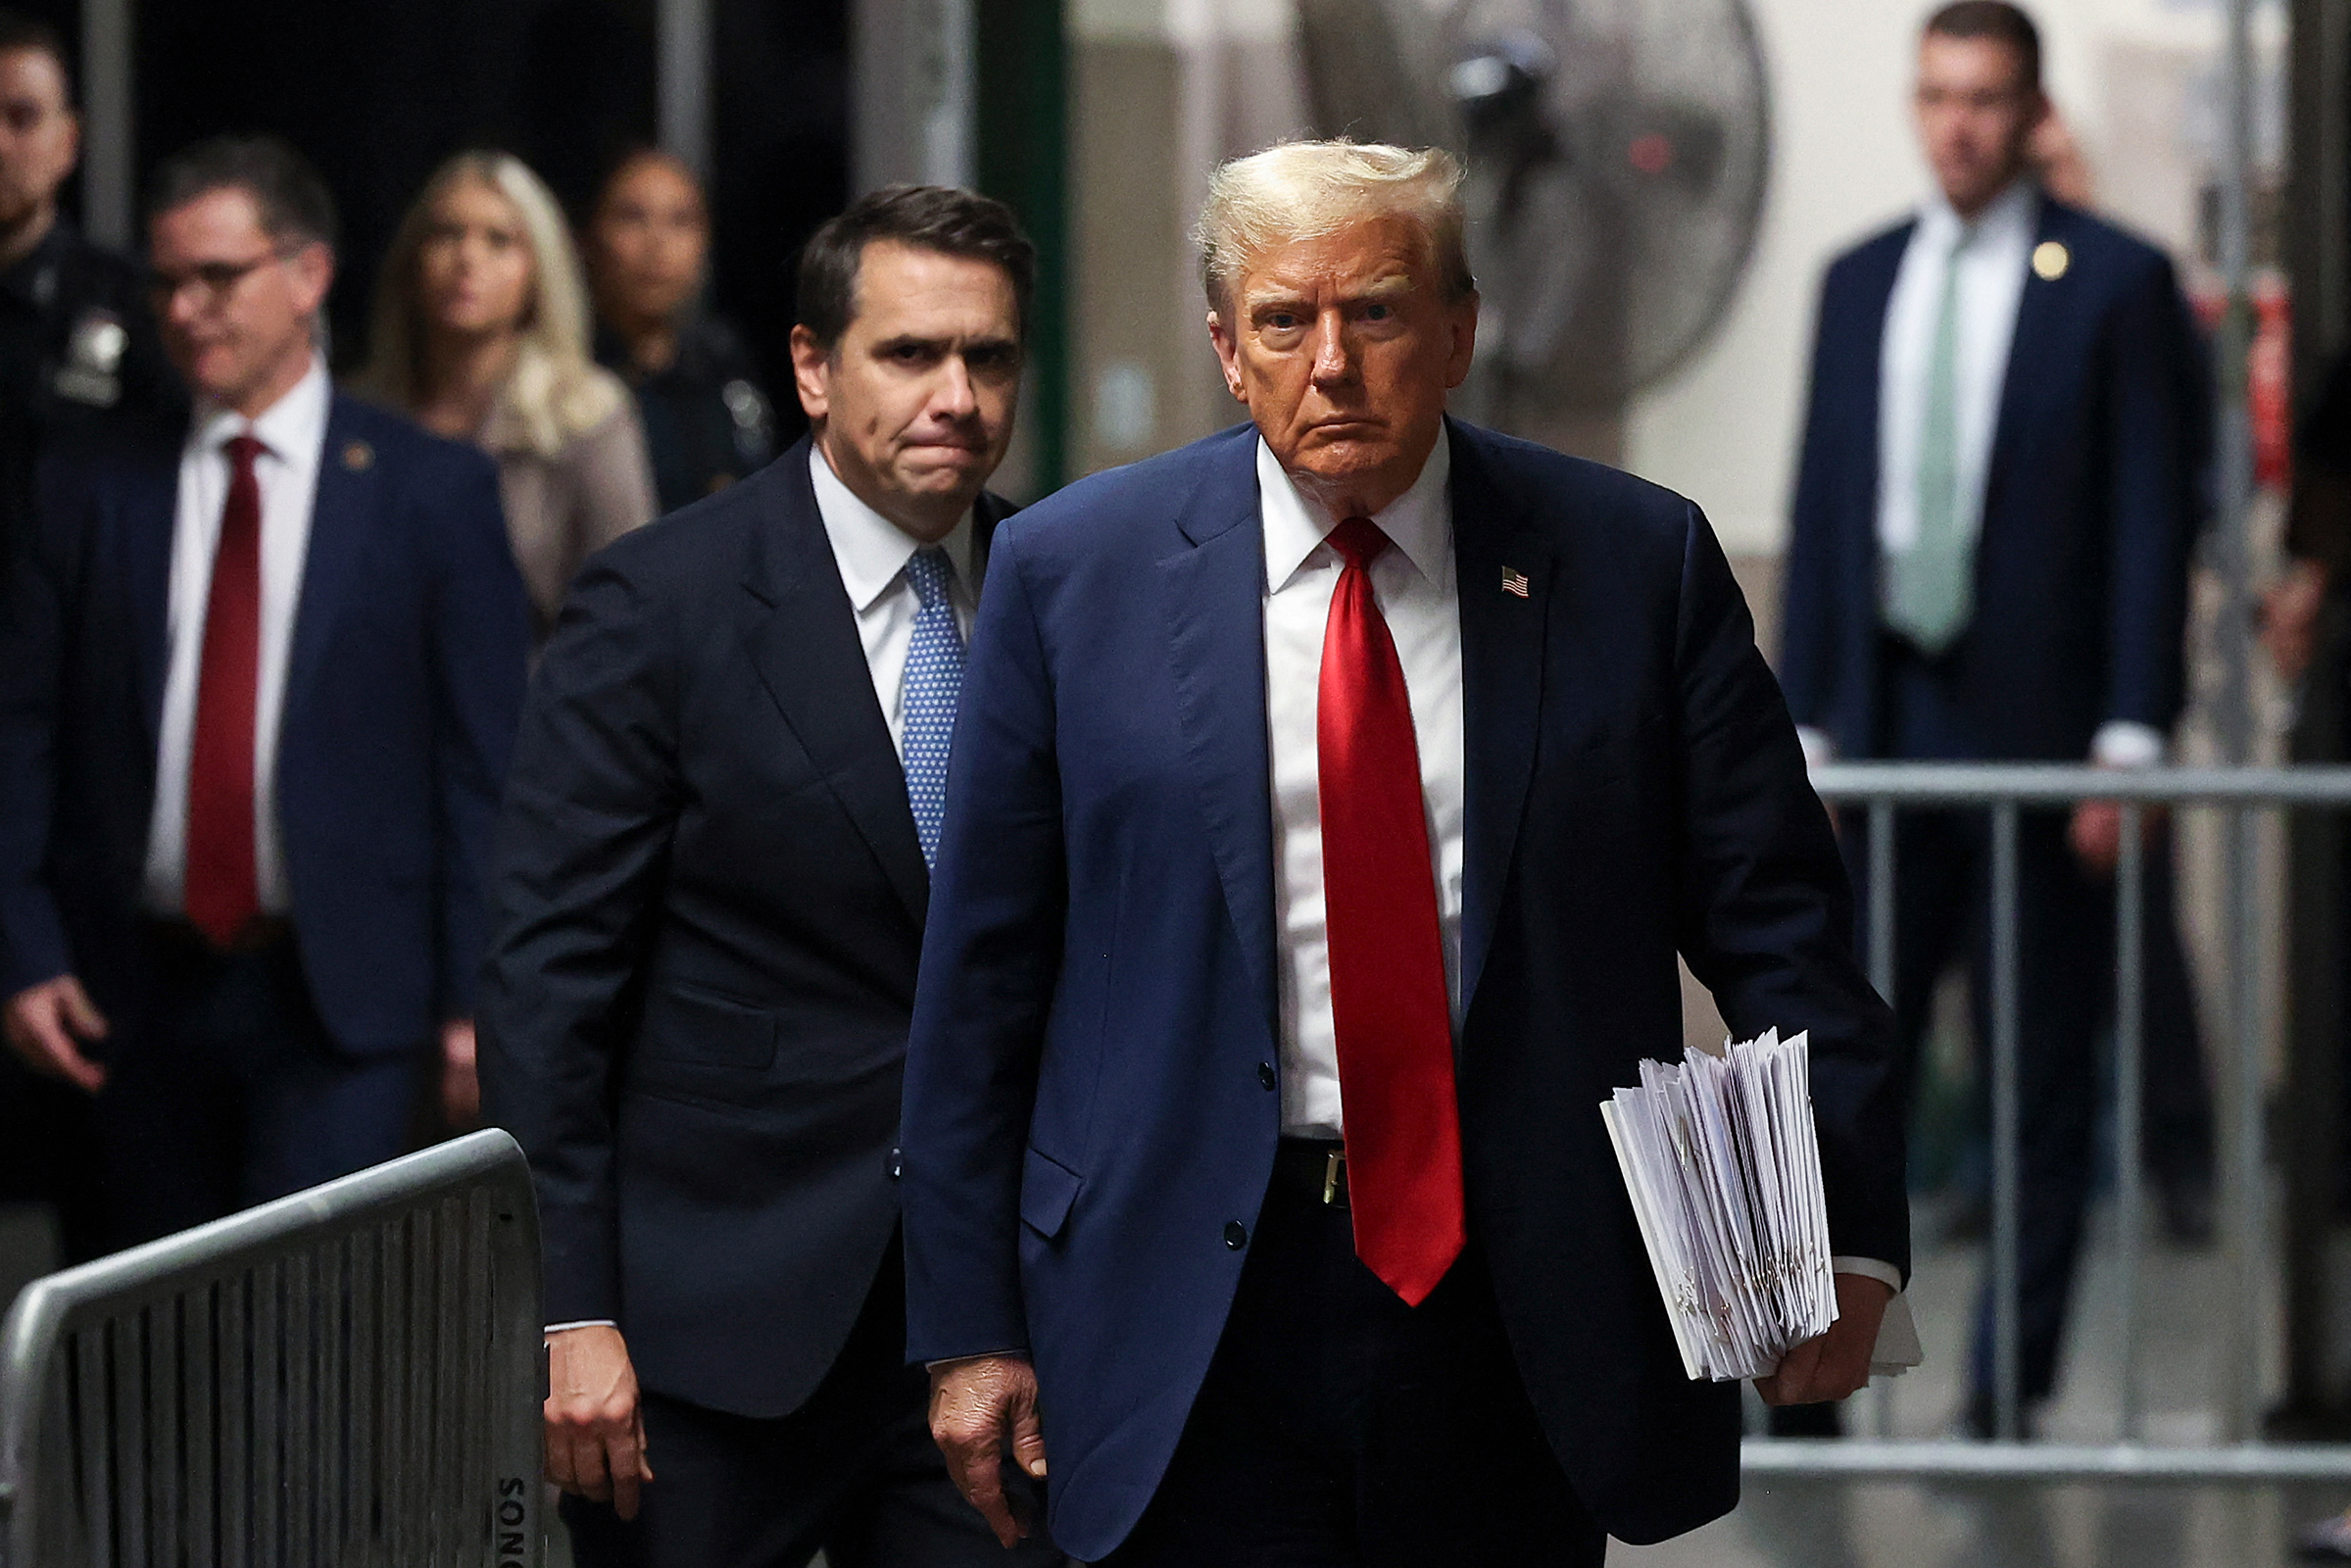 Former President Donald Trump, with attorney Todd Blanche, walks toward the press to speak at Manhattan Criminal Court in New York City on April 23.